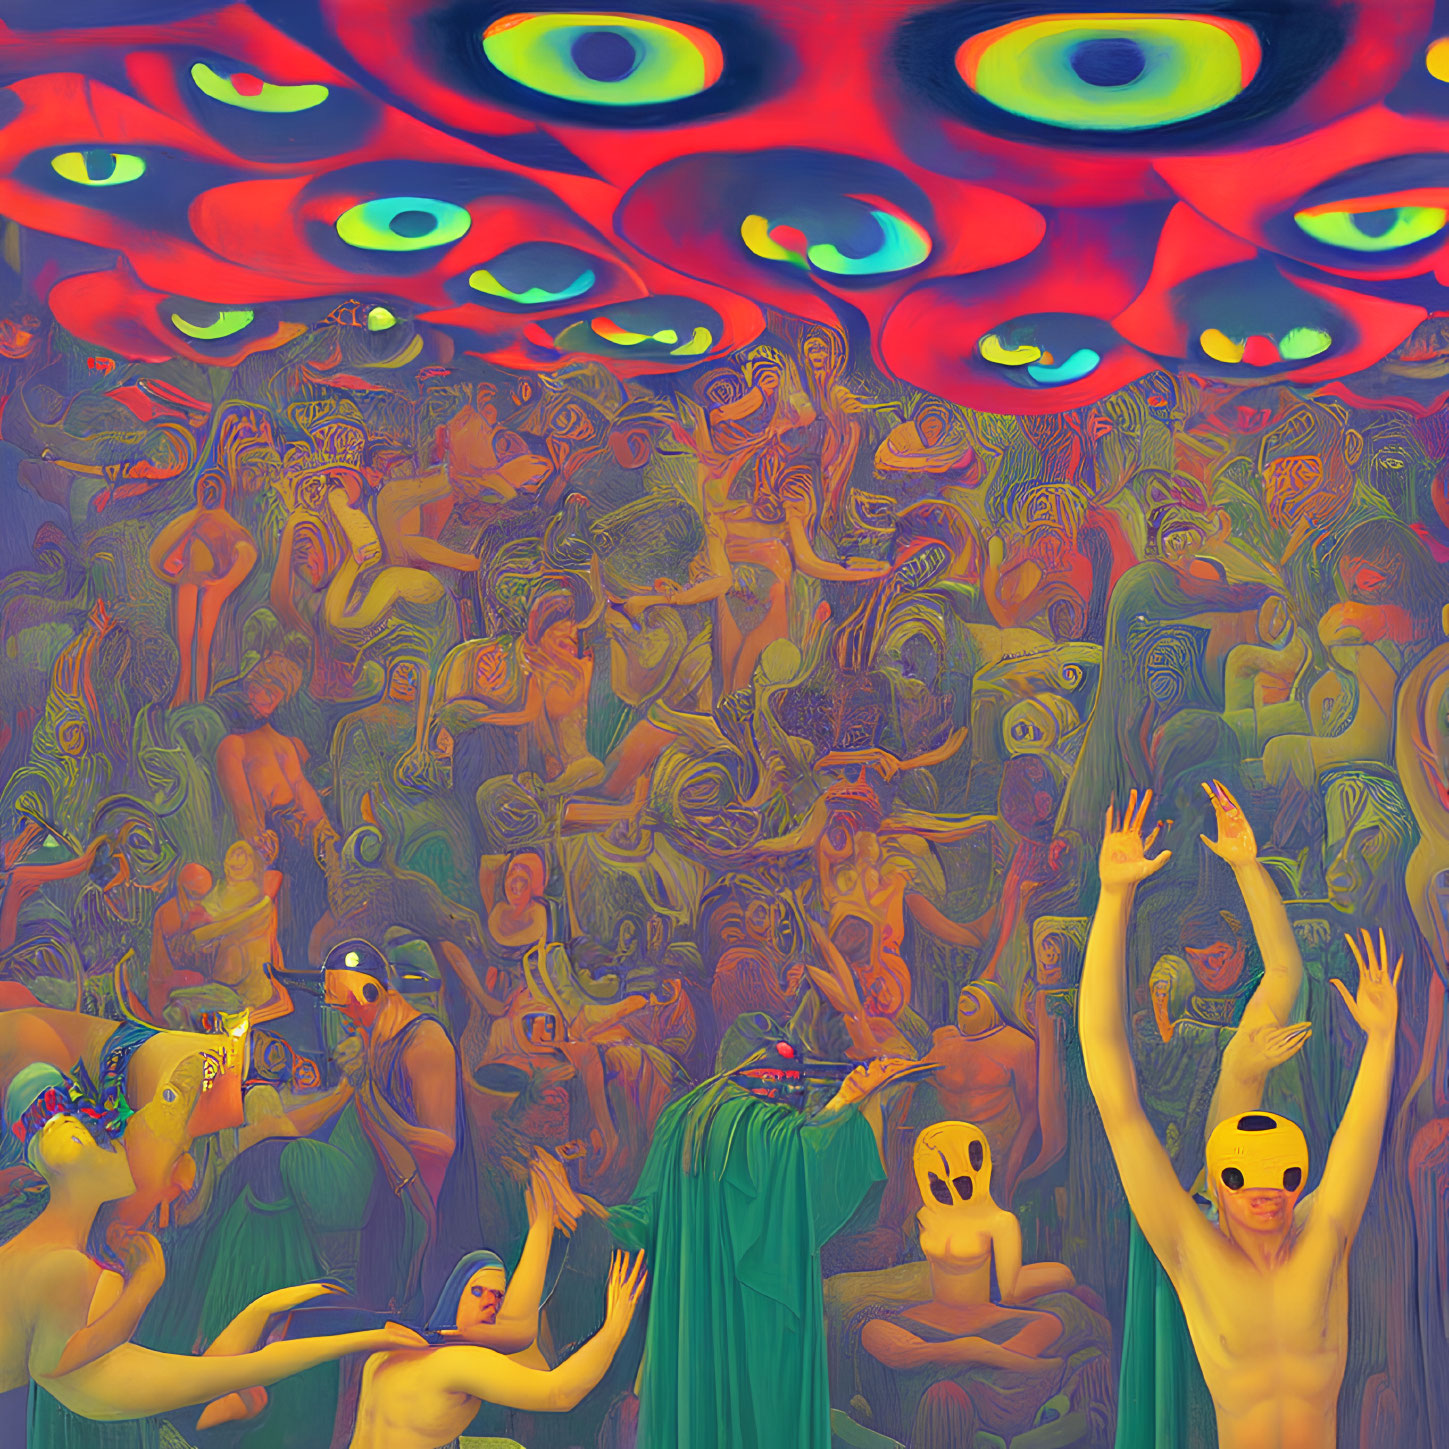 Colorful surreal painting: human figures in masks among many eyes